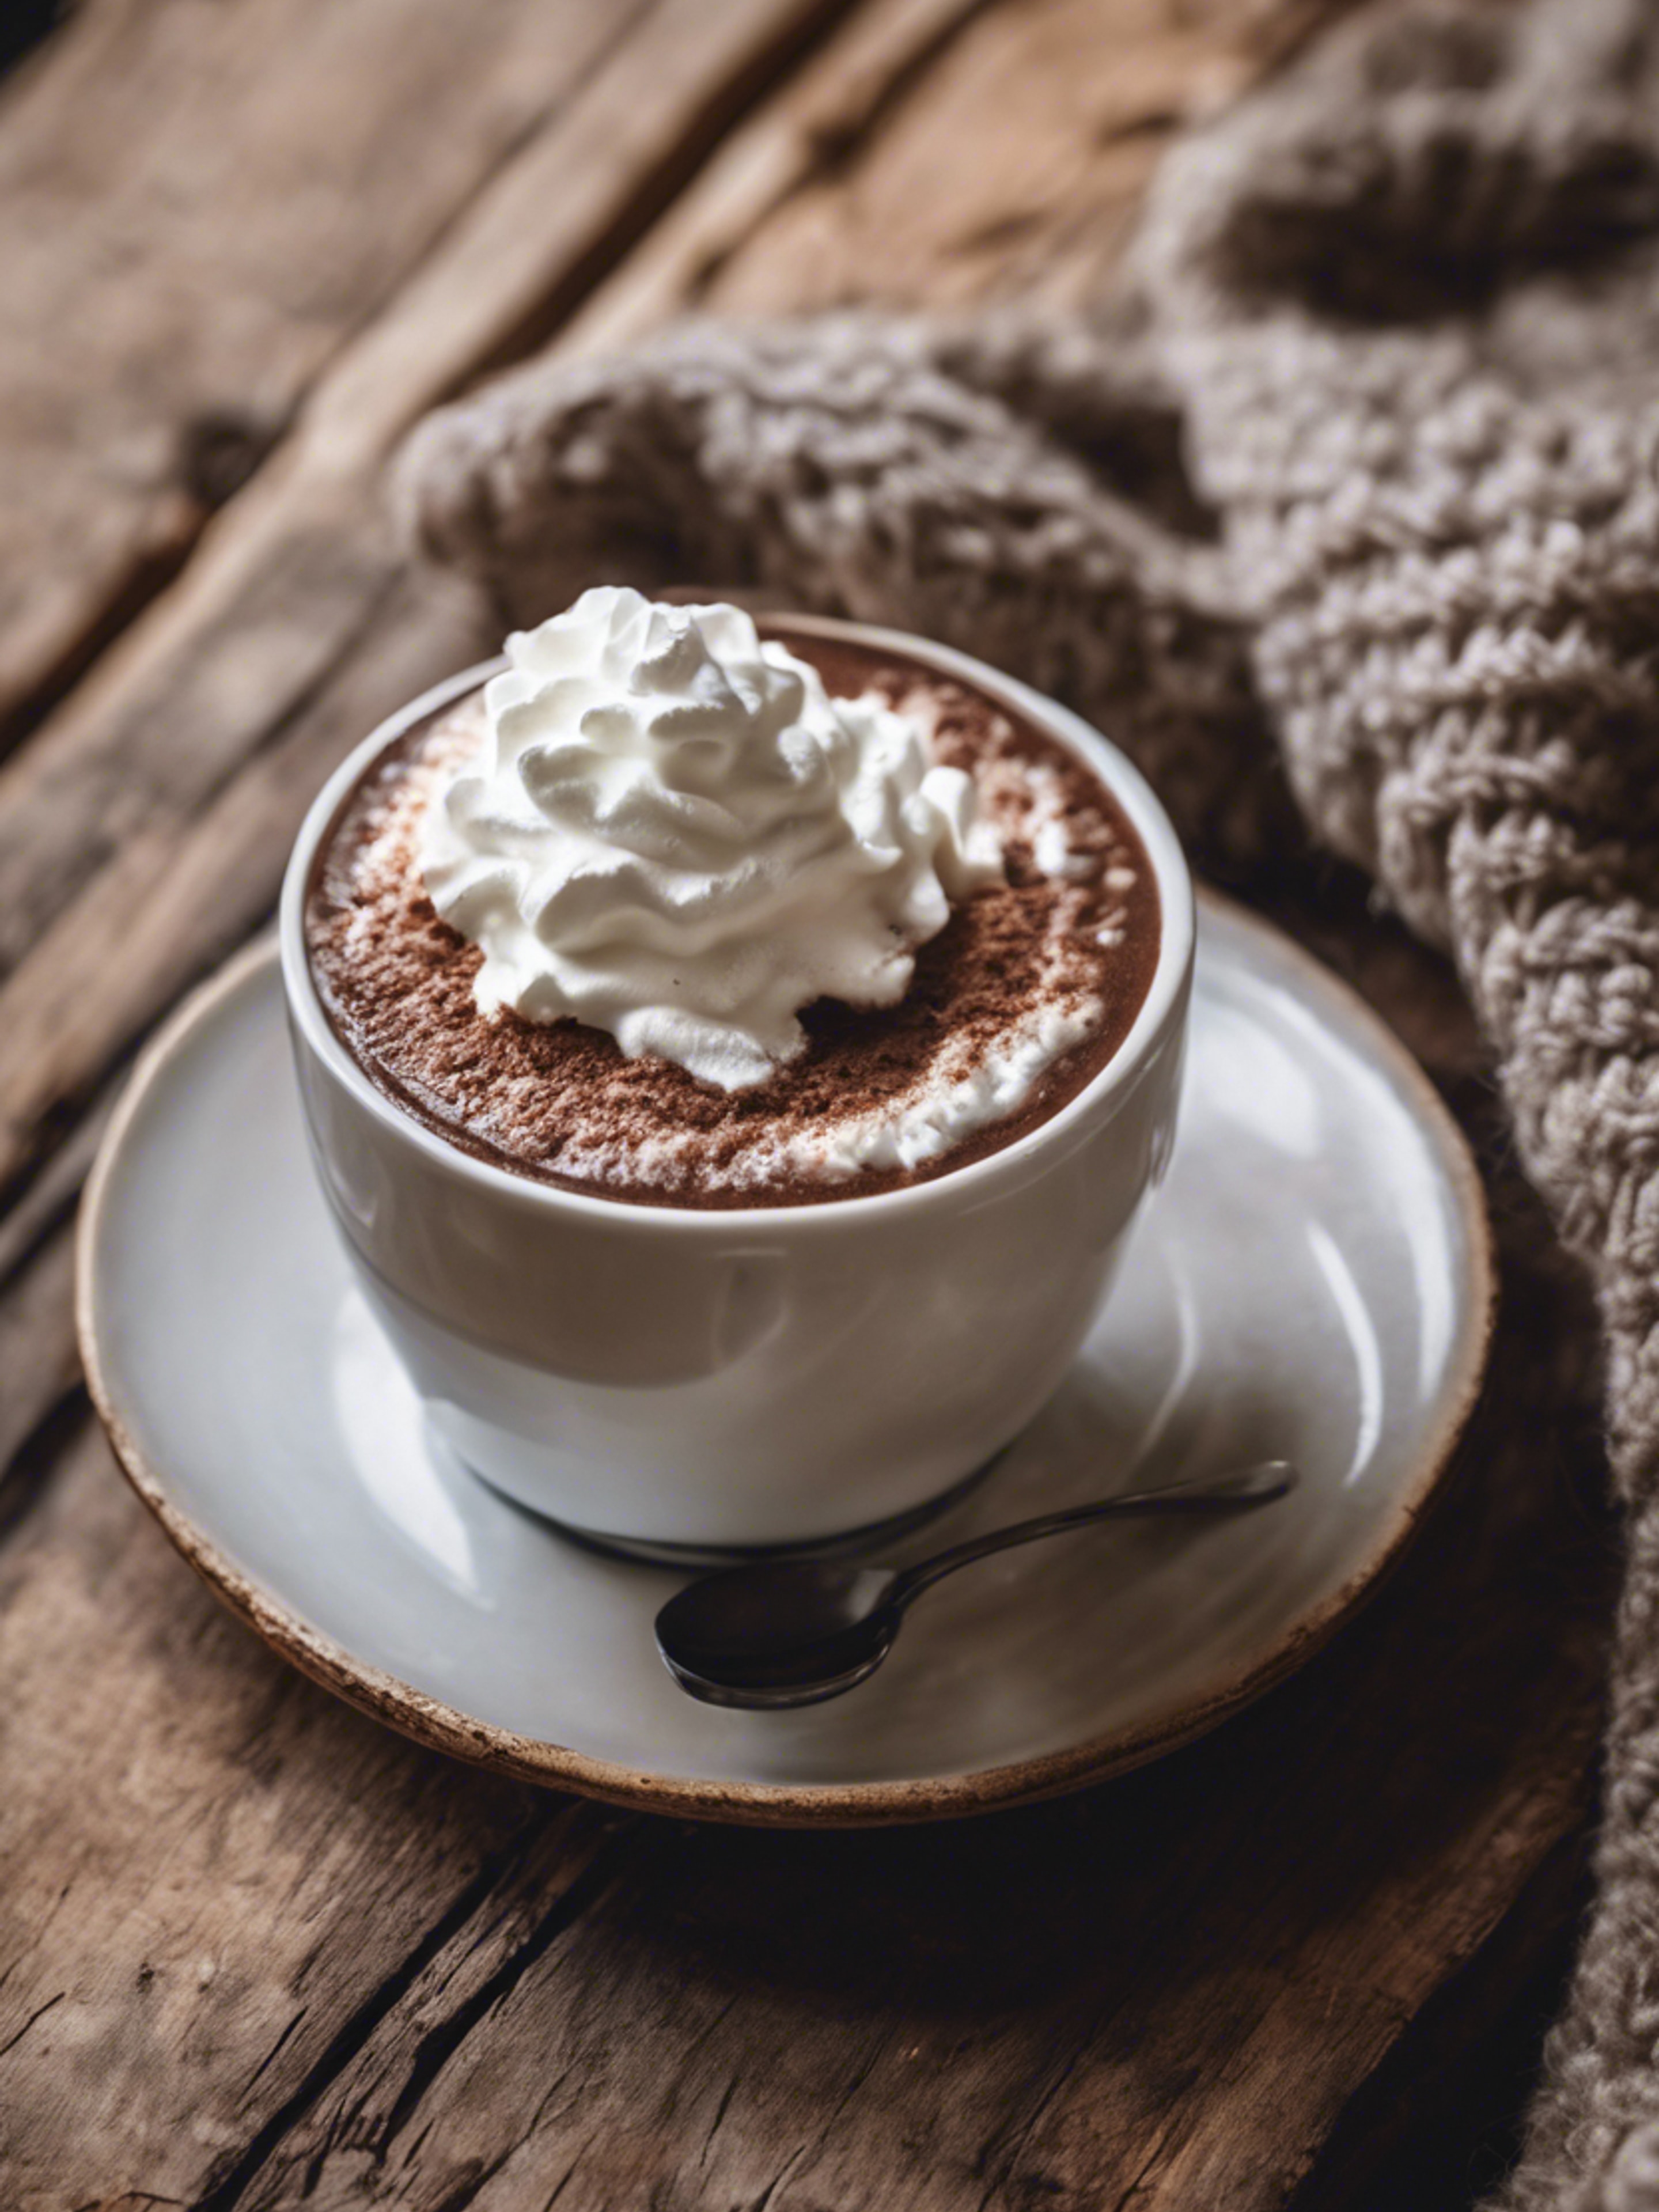 A porcelain cup of steaming hot chocolate topped with whipped cream, next to a crochet coaster on a rough wooden table.壁紙[f8ececc79cde48c88690]